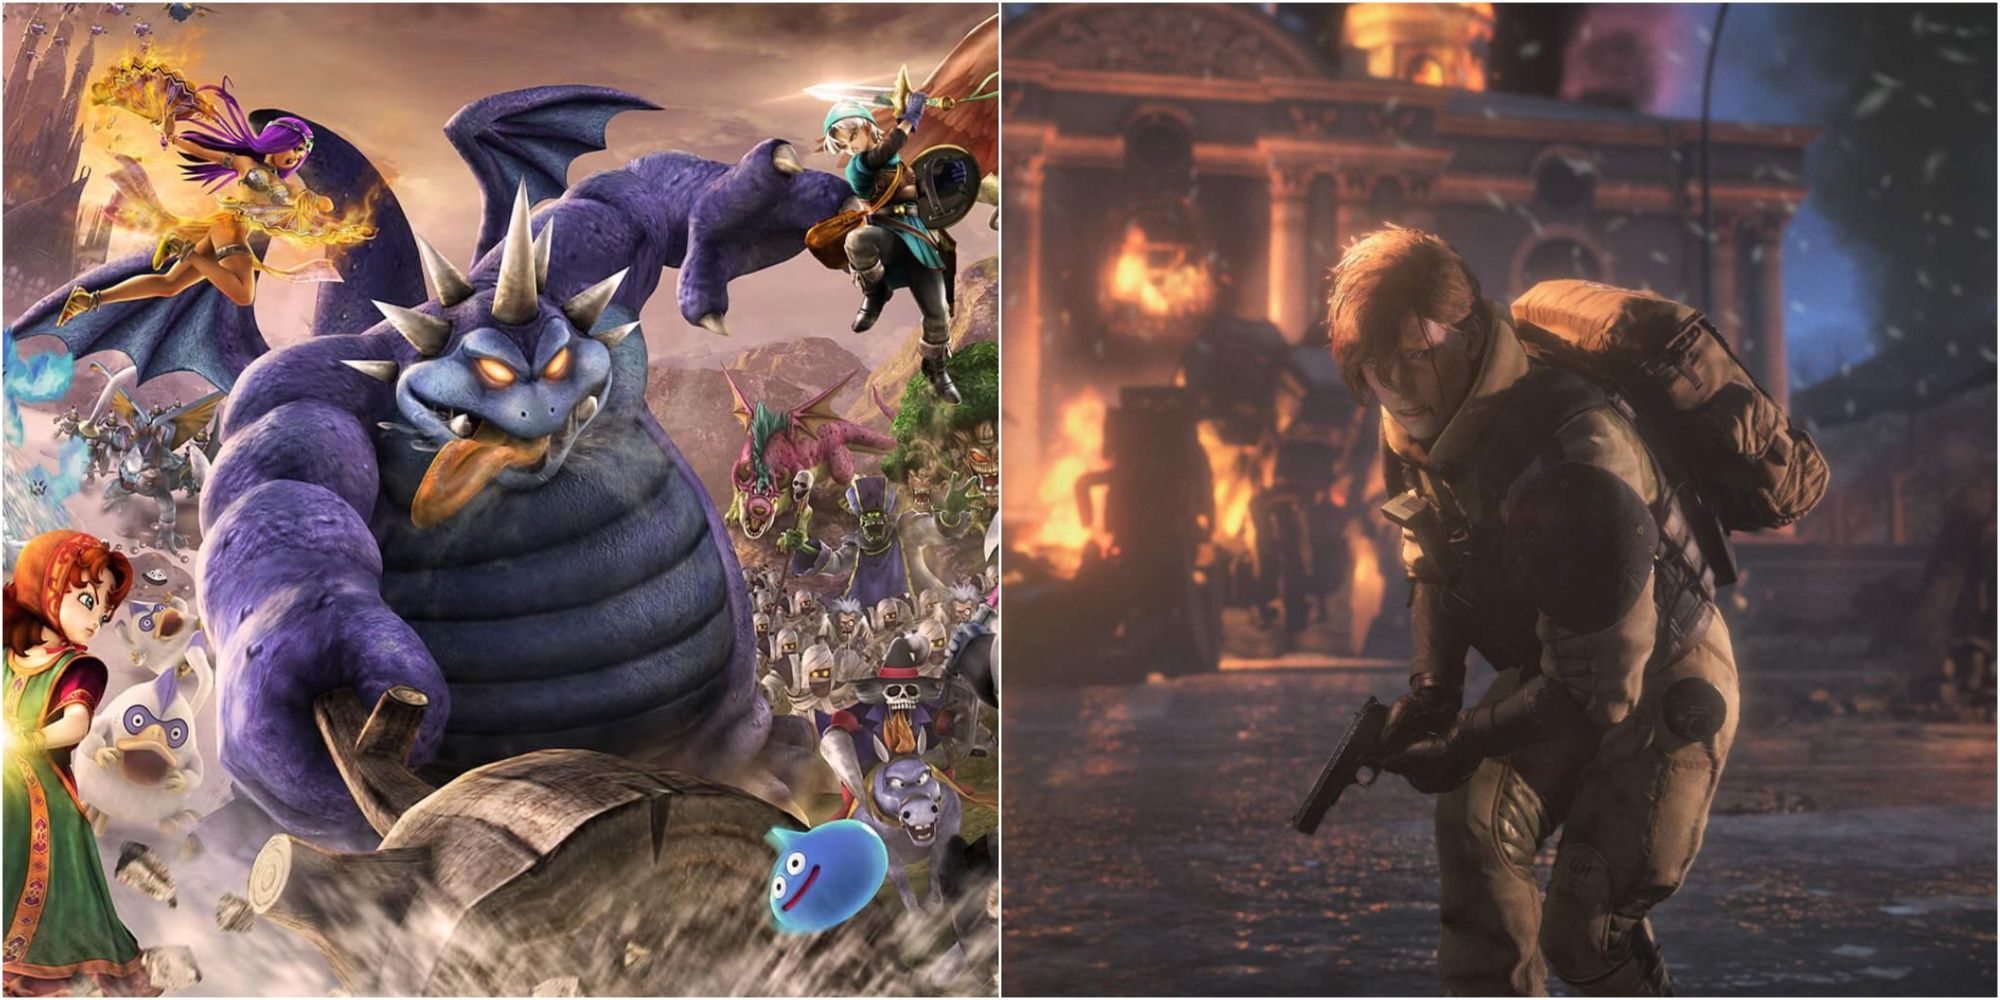 Dragon Quest Heroes 2 and Left Alive 